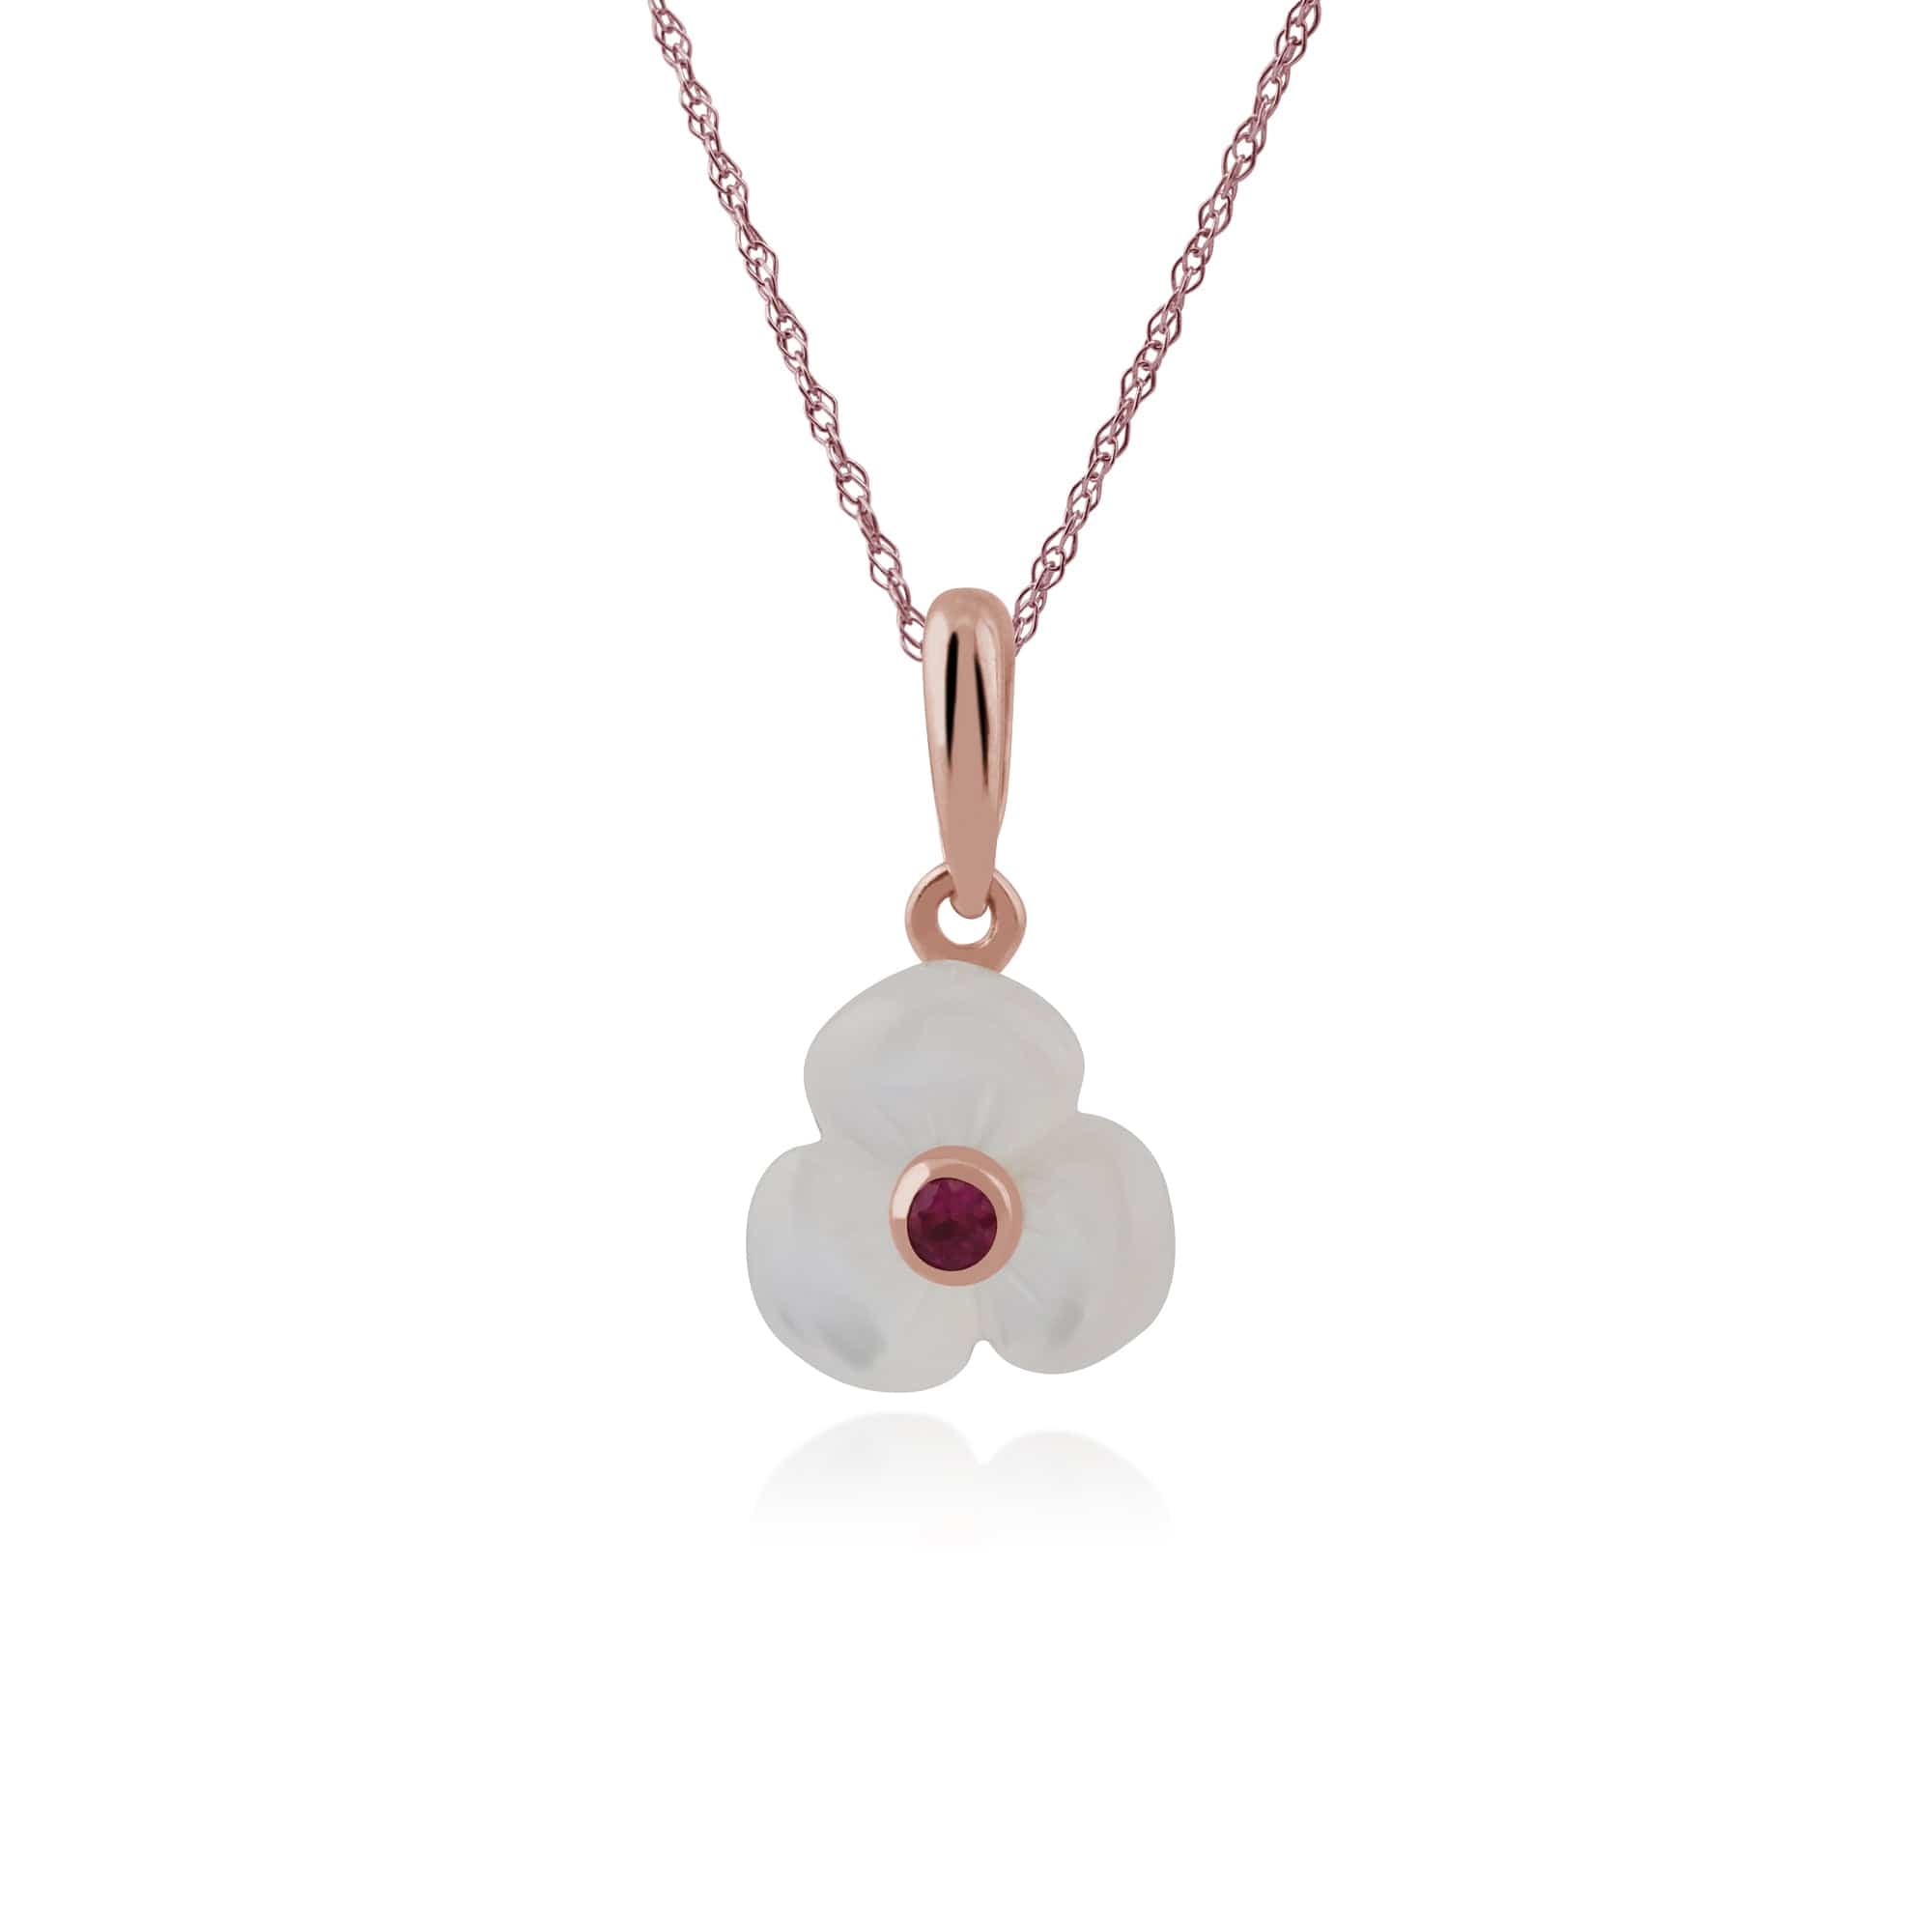 Floral Round Ruby & Mother of Pearl Poppy Pendant & Ring Set in Rose Gold Plated 925 Sterling Silver - Gemondo